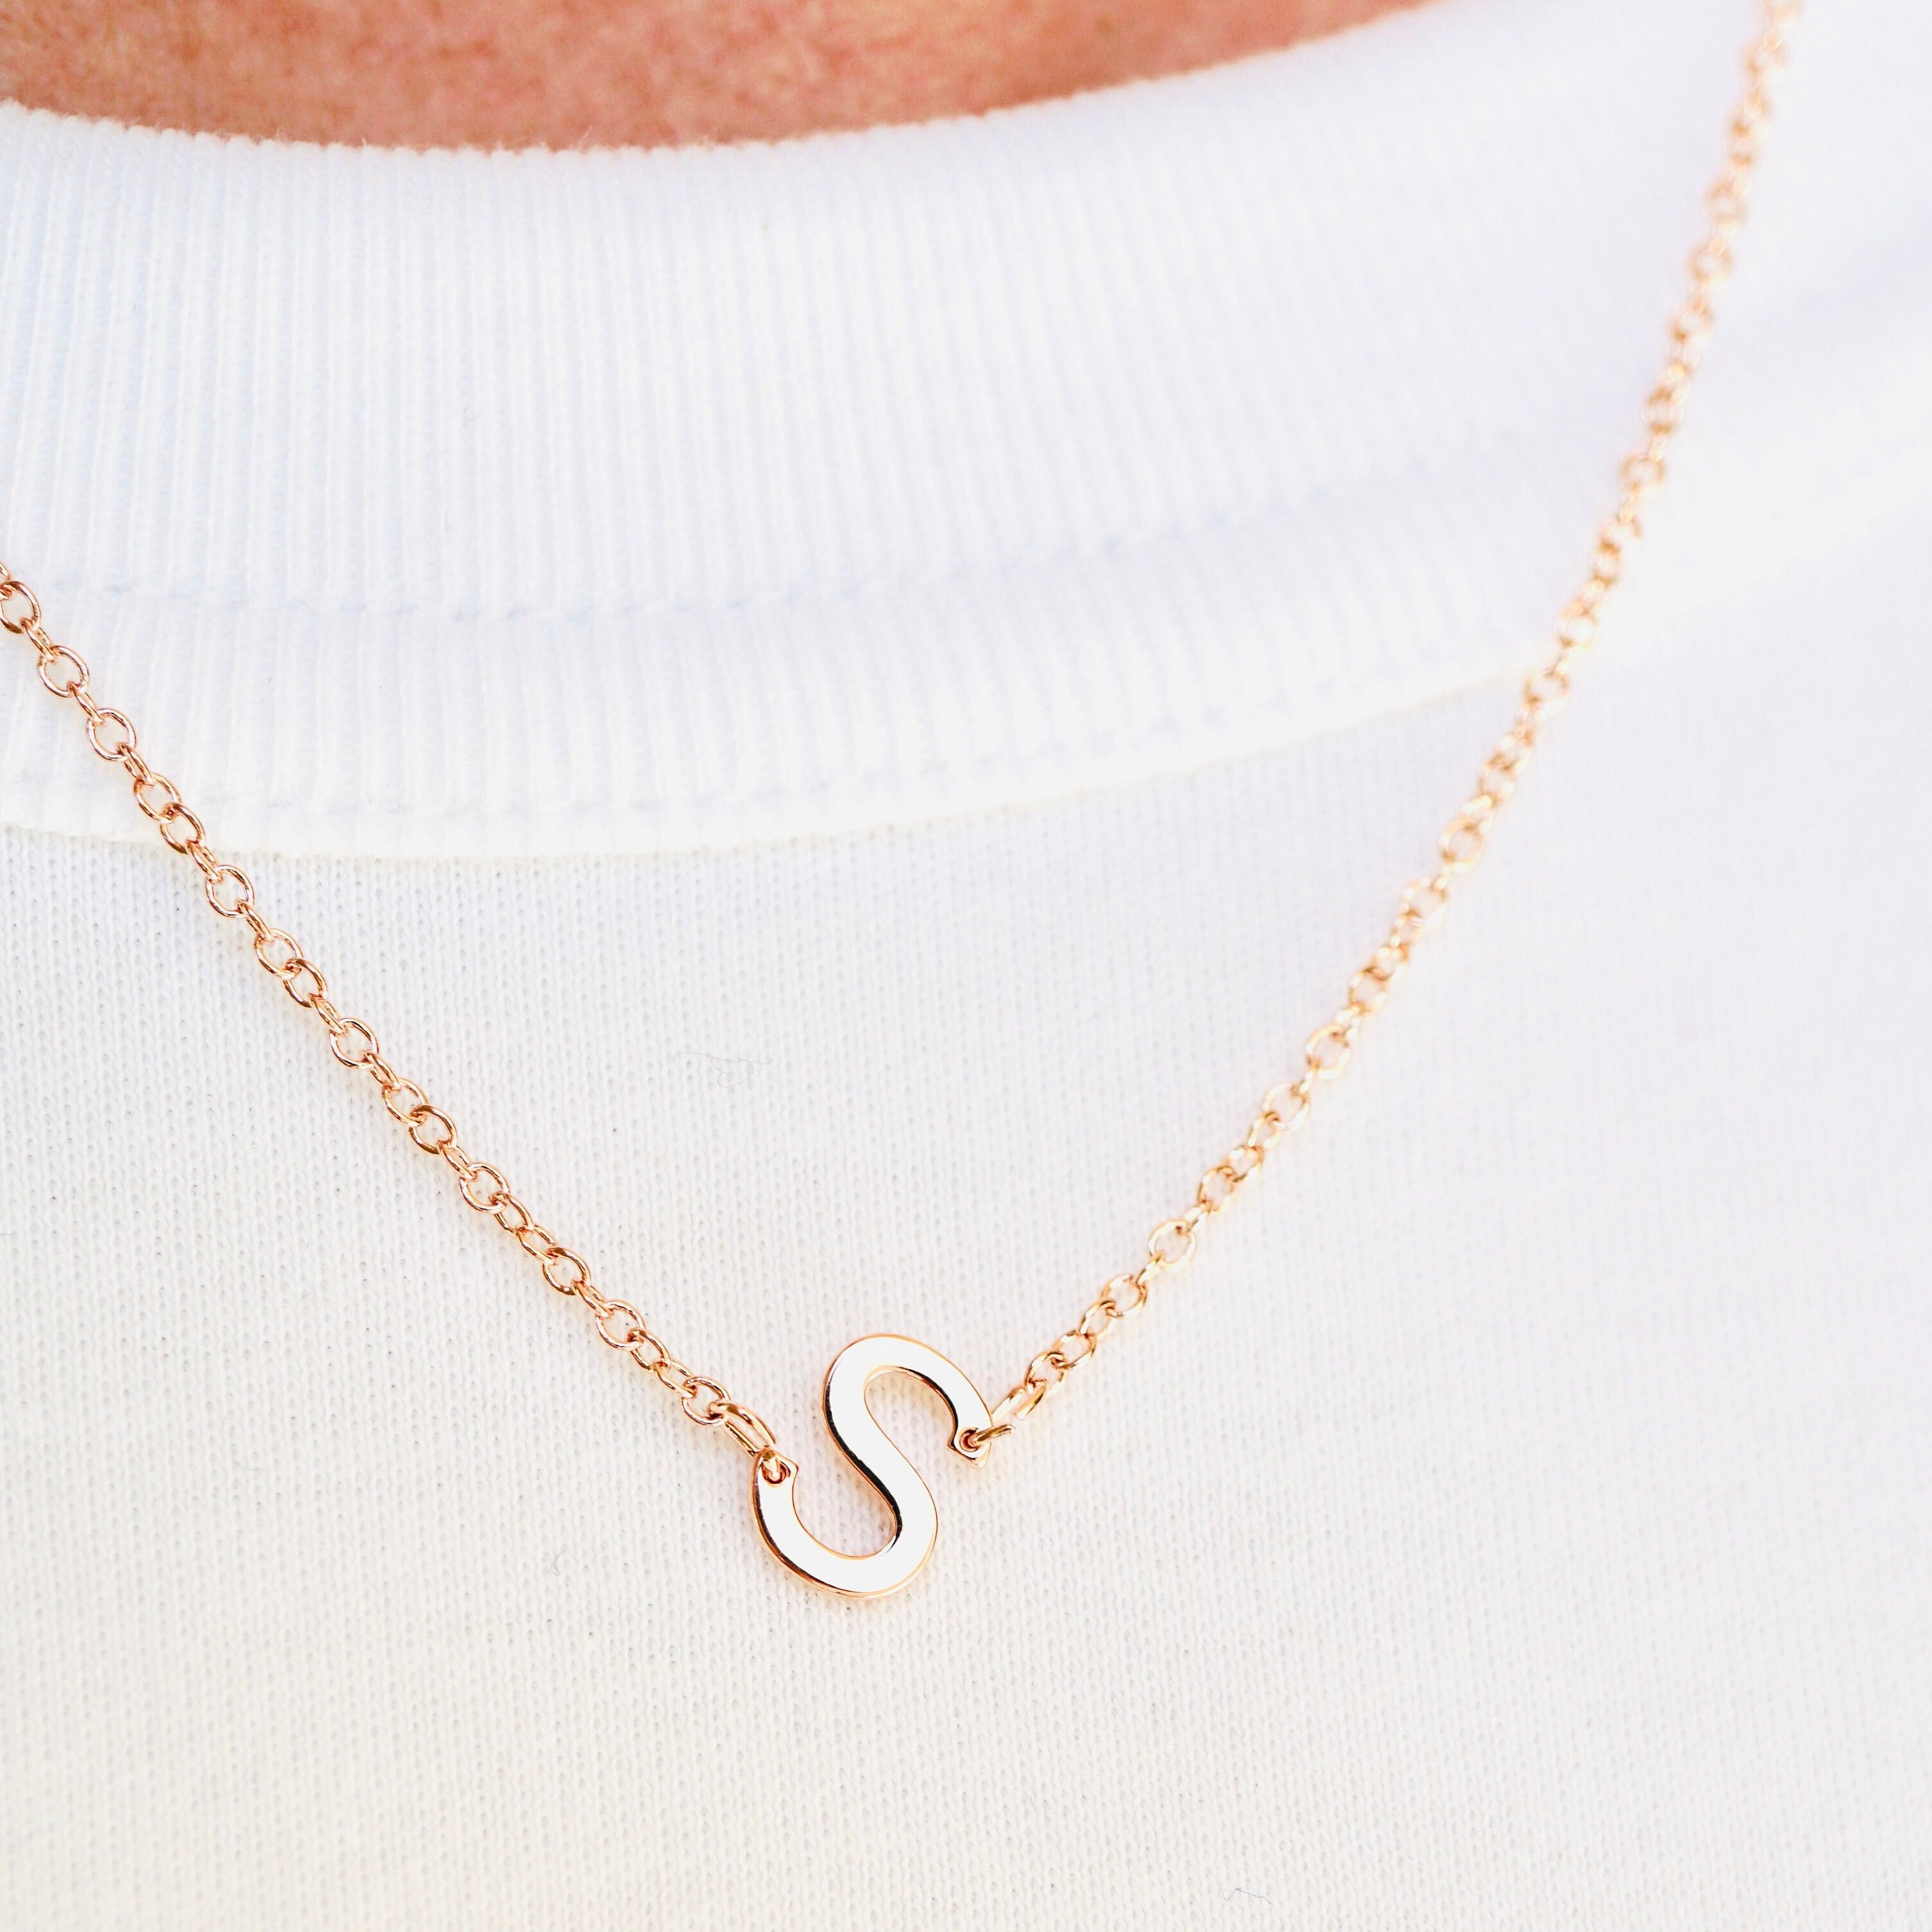 Pin by ‍ ᥫ᭡ . on 𝐍𝐁𝐀  Chain necklace, Necklace, Pendant necklace